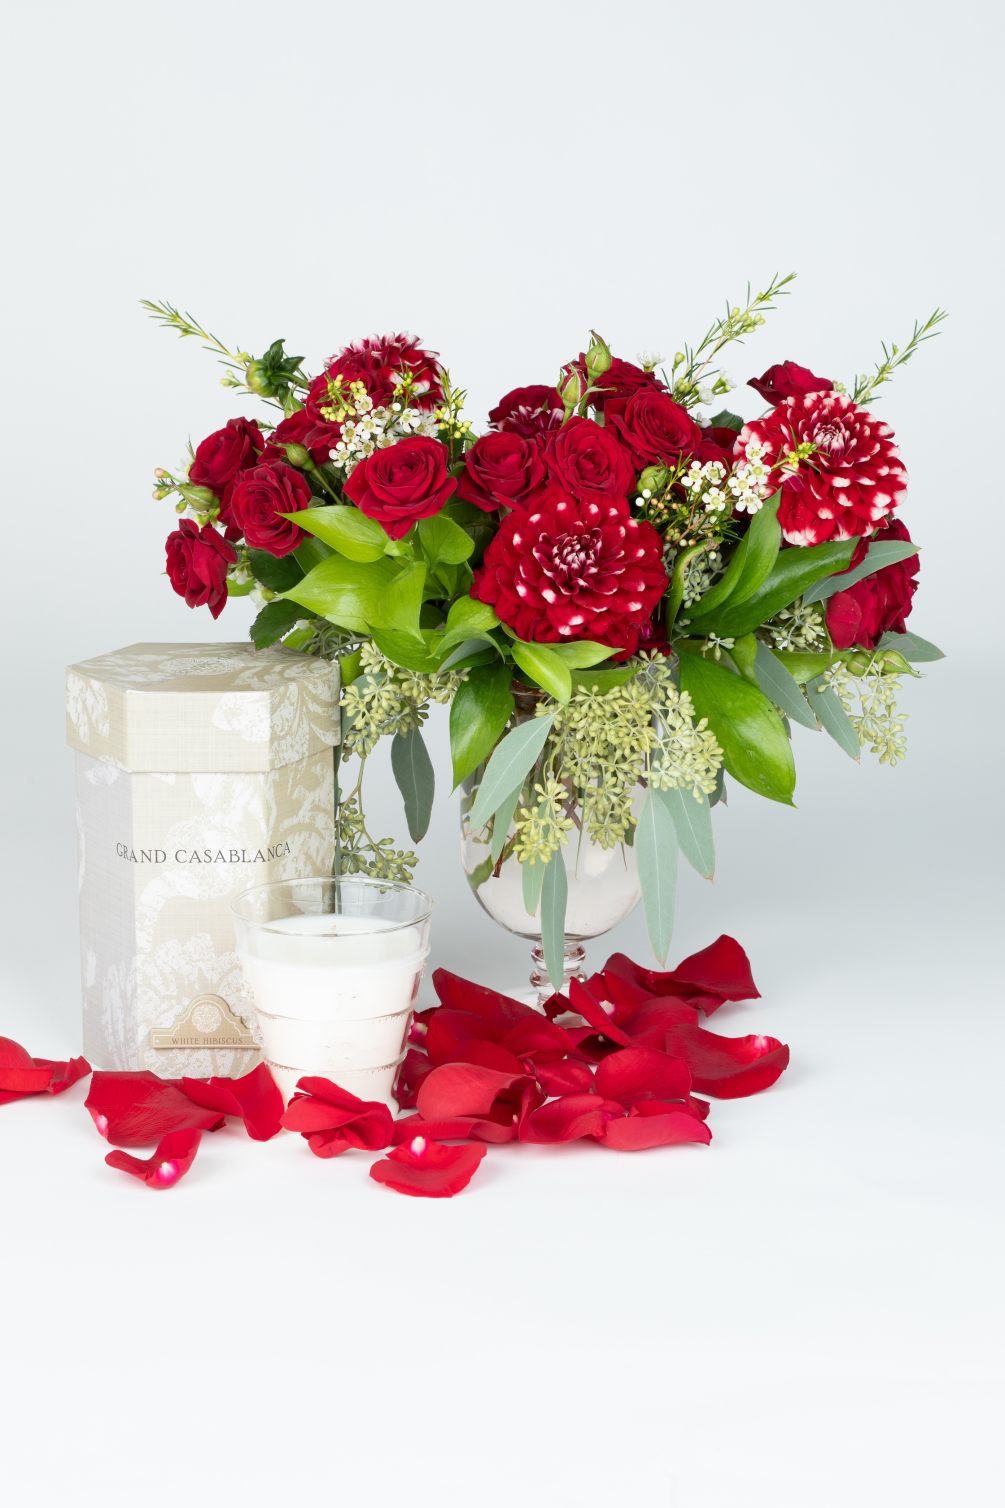 Pair your favorite arrangement with this beautiful fragrant candle. 